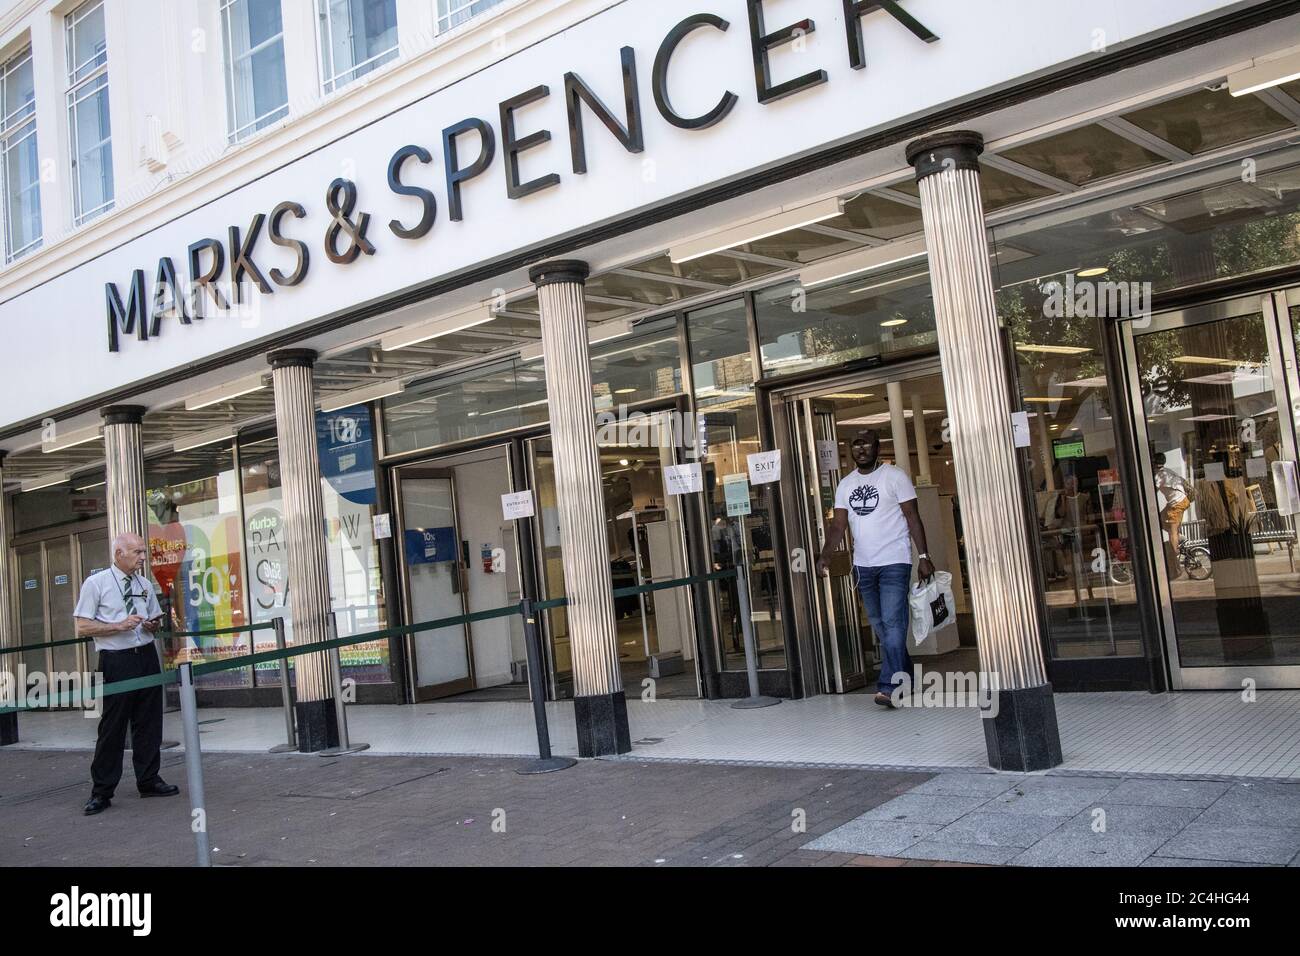 London, UK. 27th June 2020. A shopper leaves a Marks & Spencer department store on Kingston Upon Thames high street as shoppers slowly return to the high streets ahead of thousands reopening on July 4 as lockdown restrictions are further eased across England. June 26th 2020, Kingston Upon Thames, Southwest London, England, United KIngdom Credit: Clickpics/Alamy Live News Stock Photo